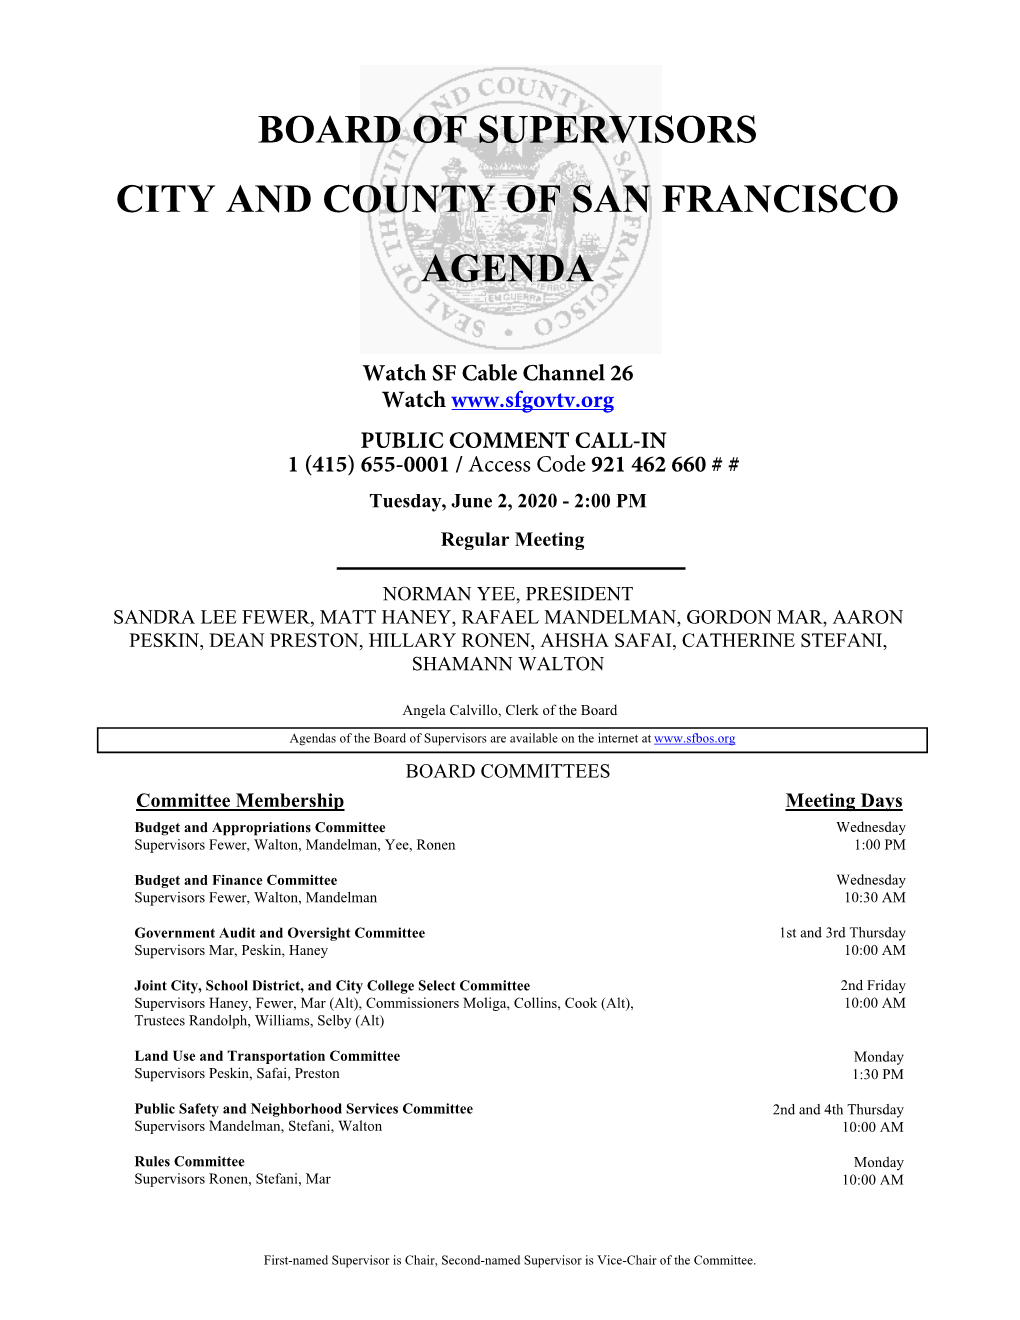 Board of Supervisors City and County of San Francisco Agenda